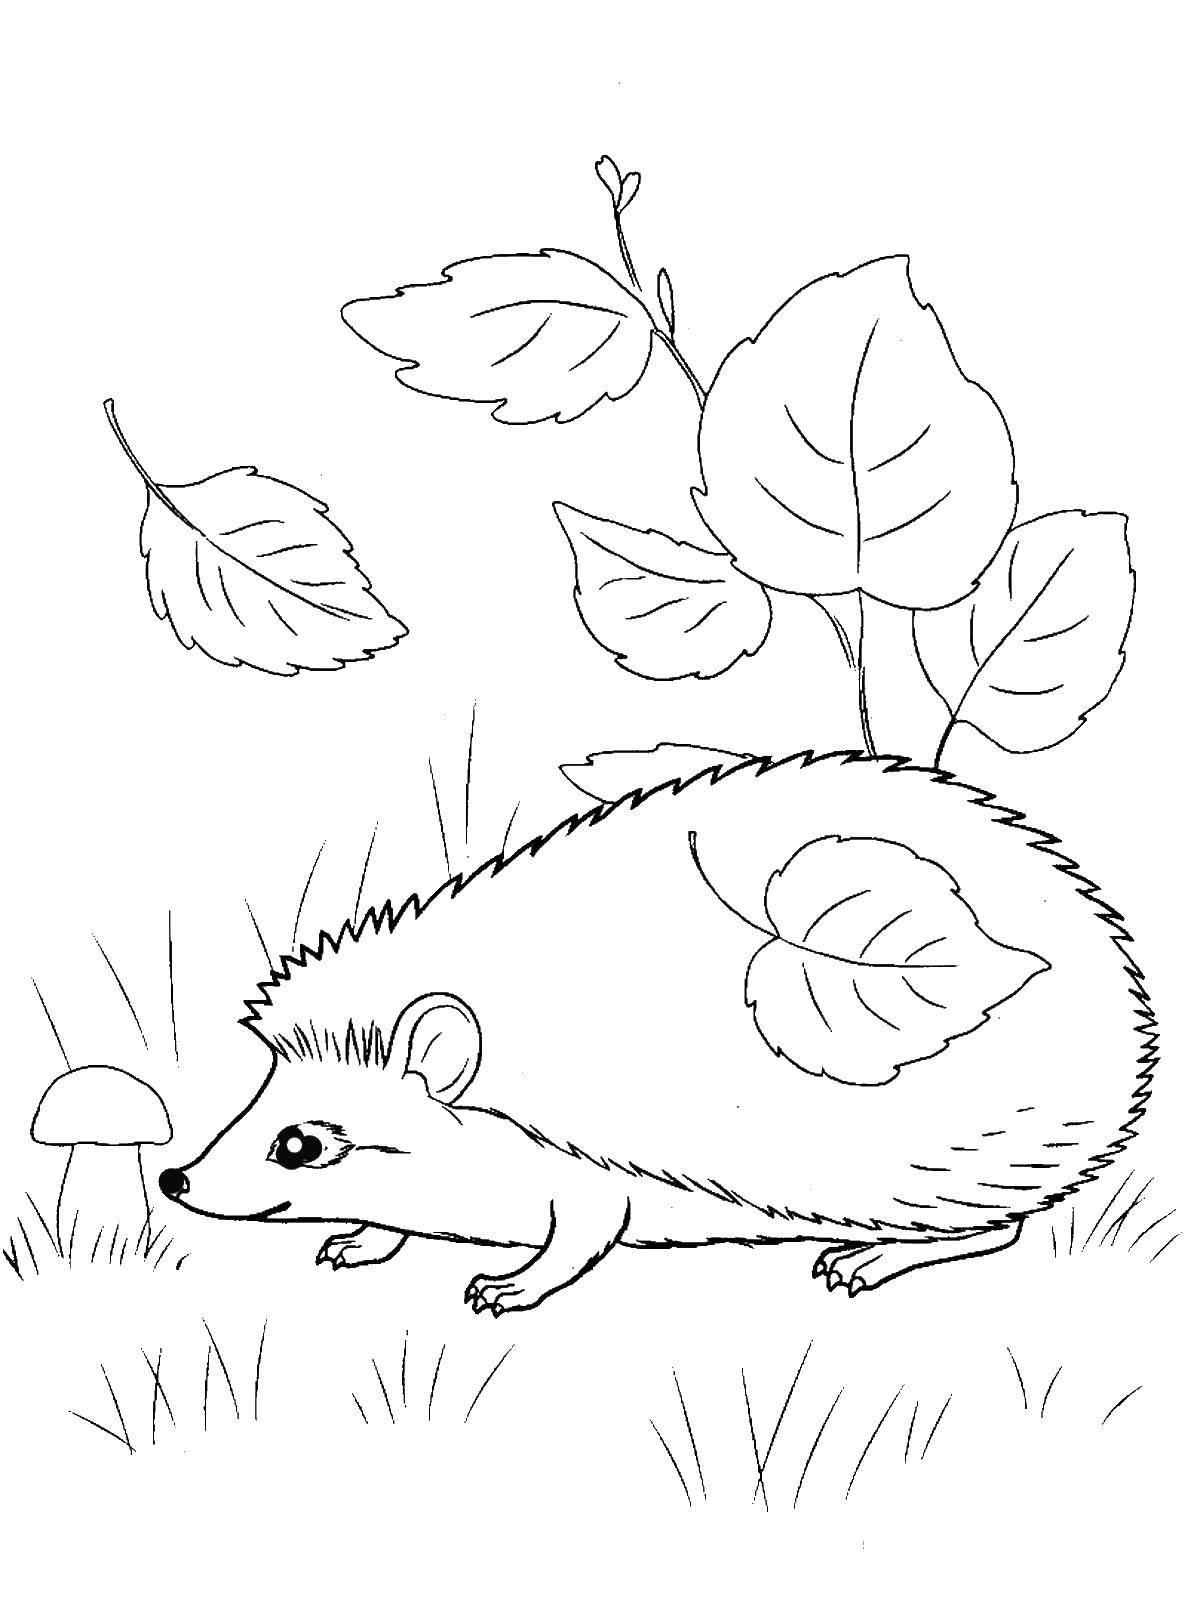 Coloring Hedgehog in the leaves. Category autumn. Tags:  hedgehog .